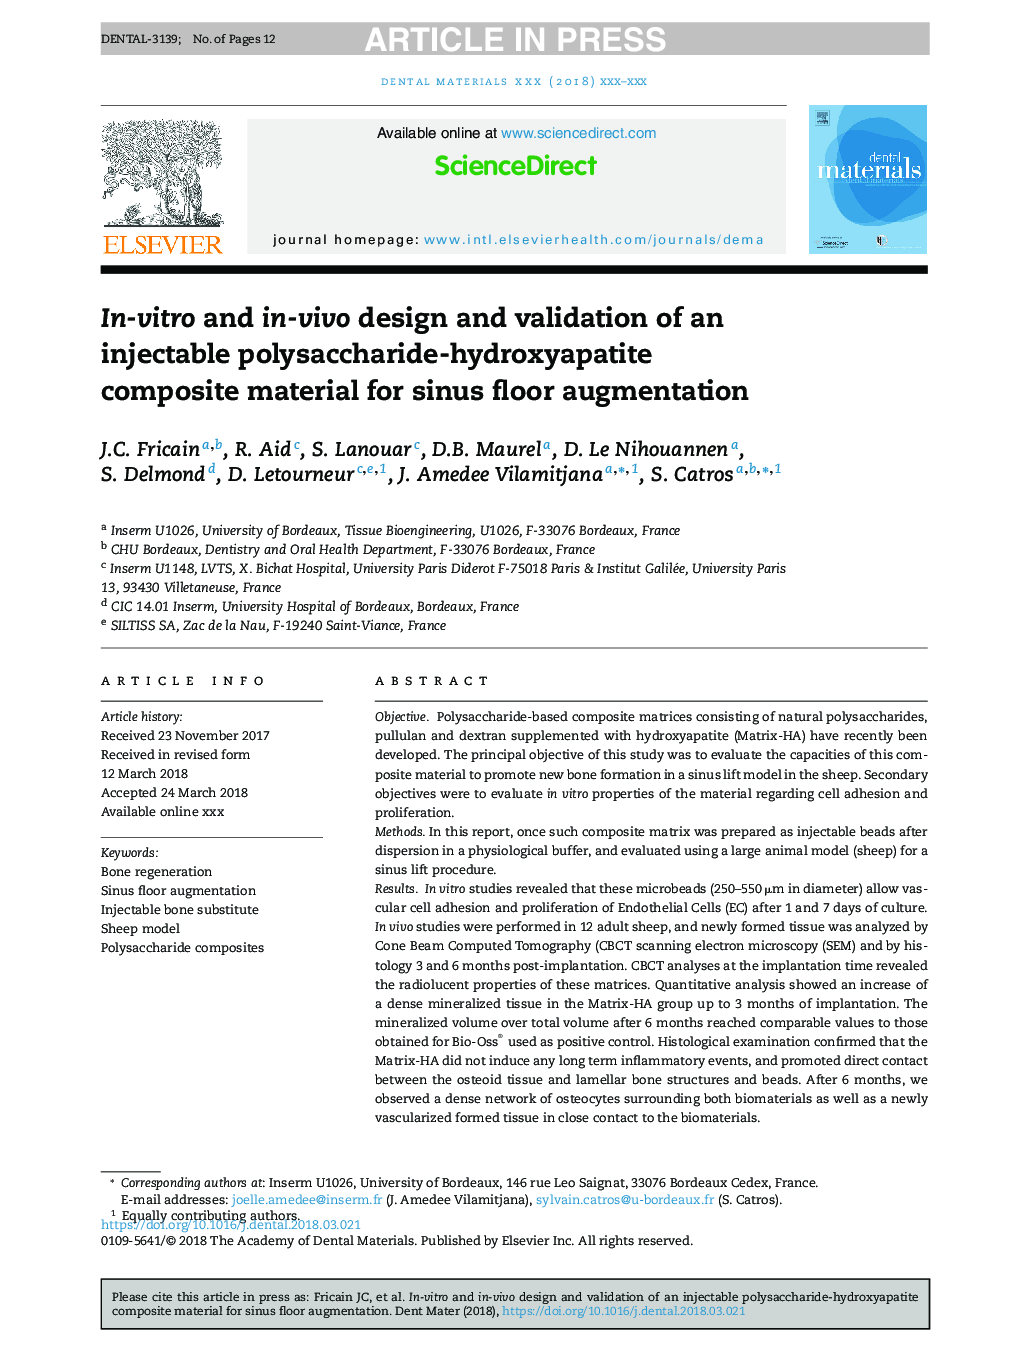 In-vitro and in-vivo design and validation of an injectable polysaccharide-hydroxyapatite composite material for sinus floor augmentation